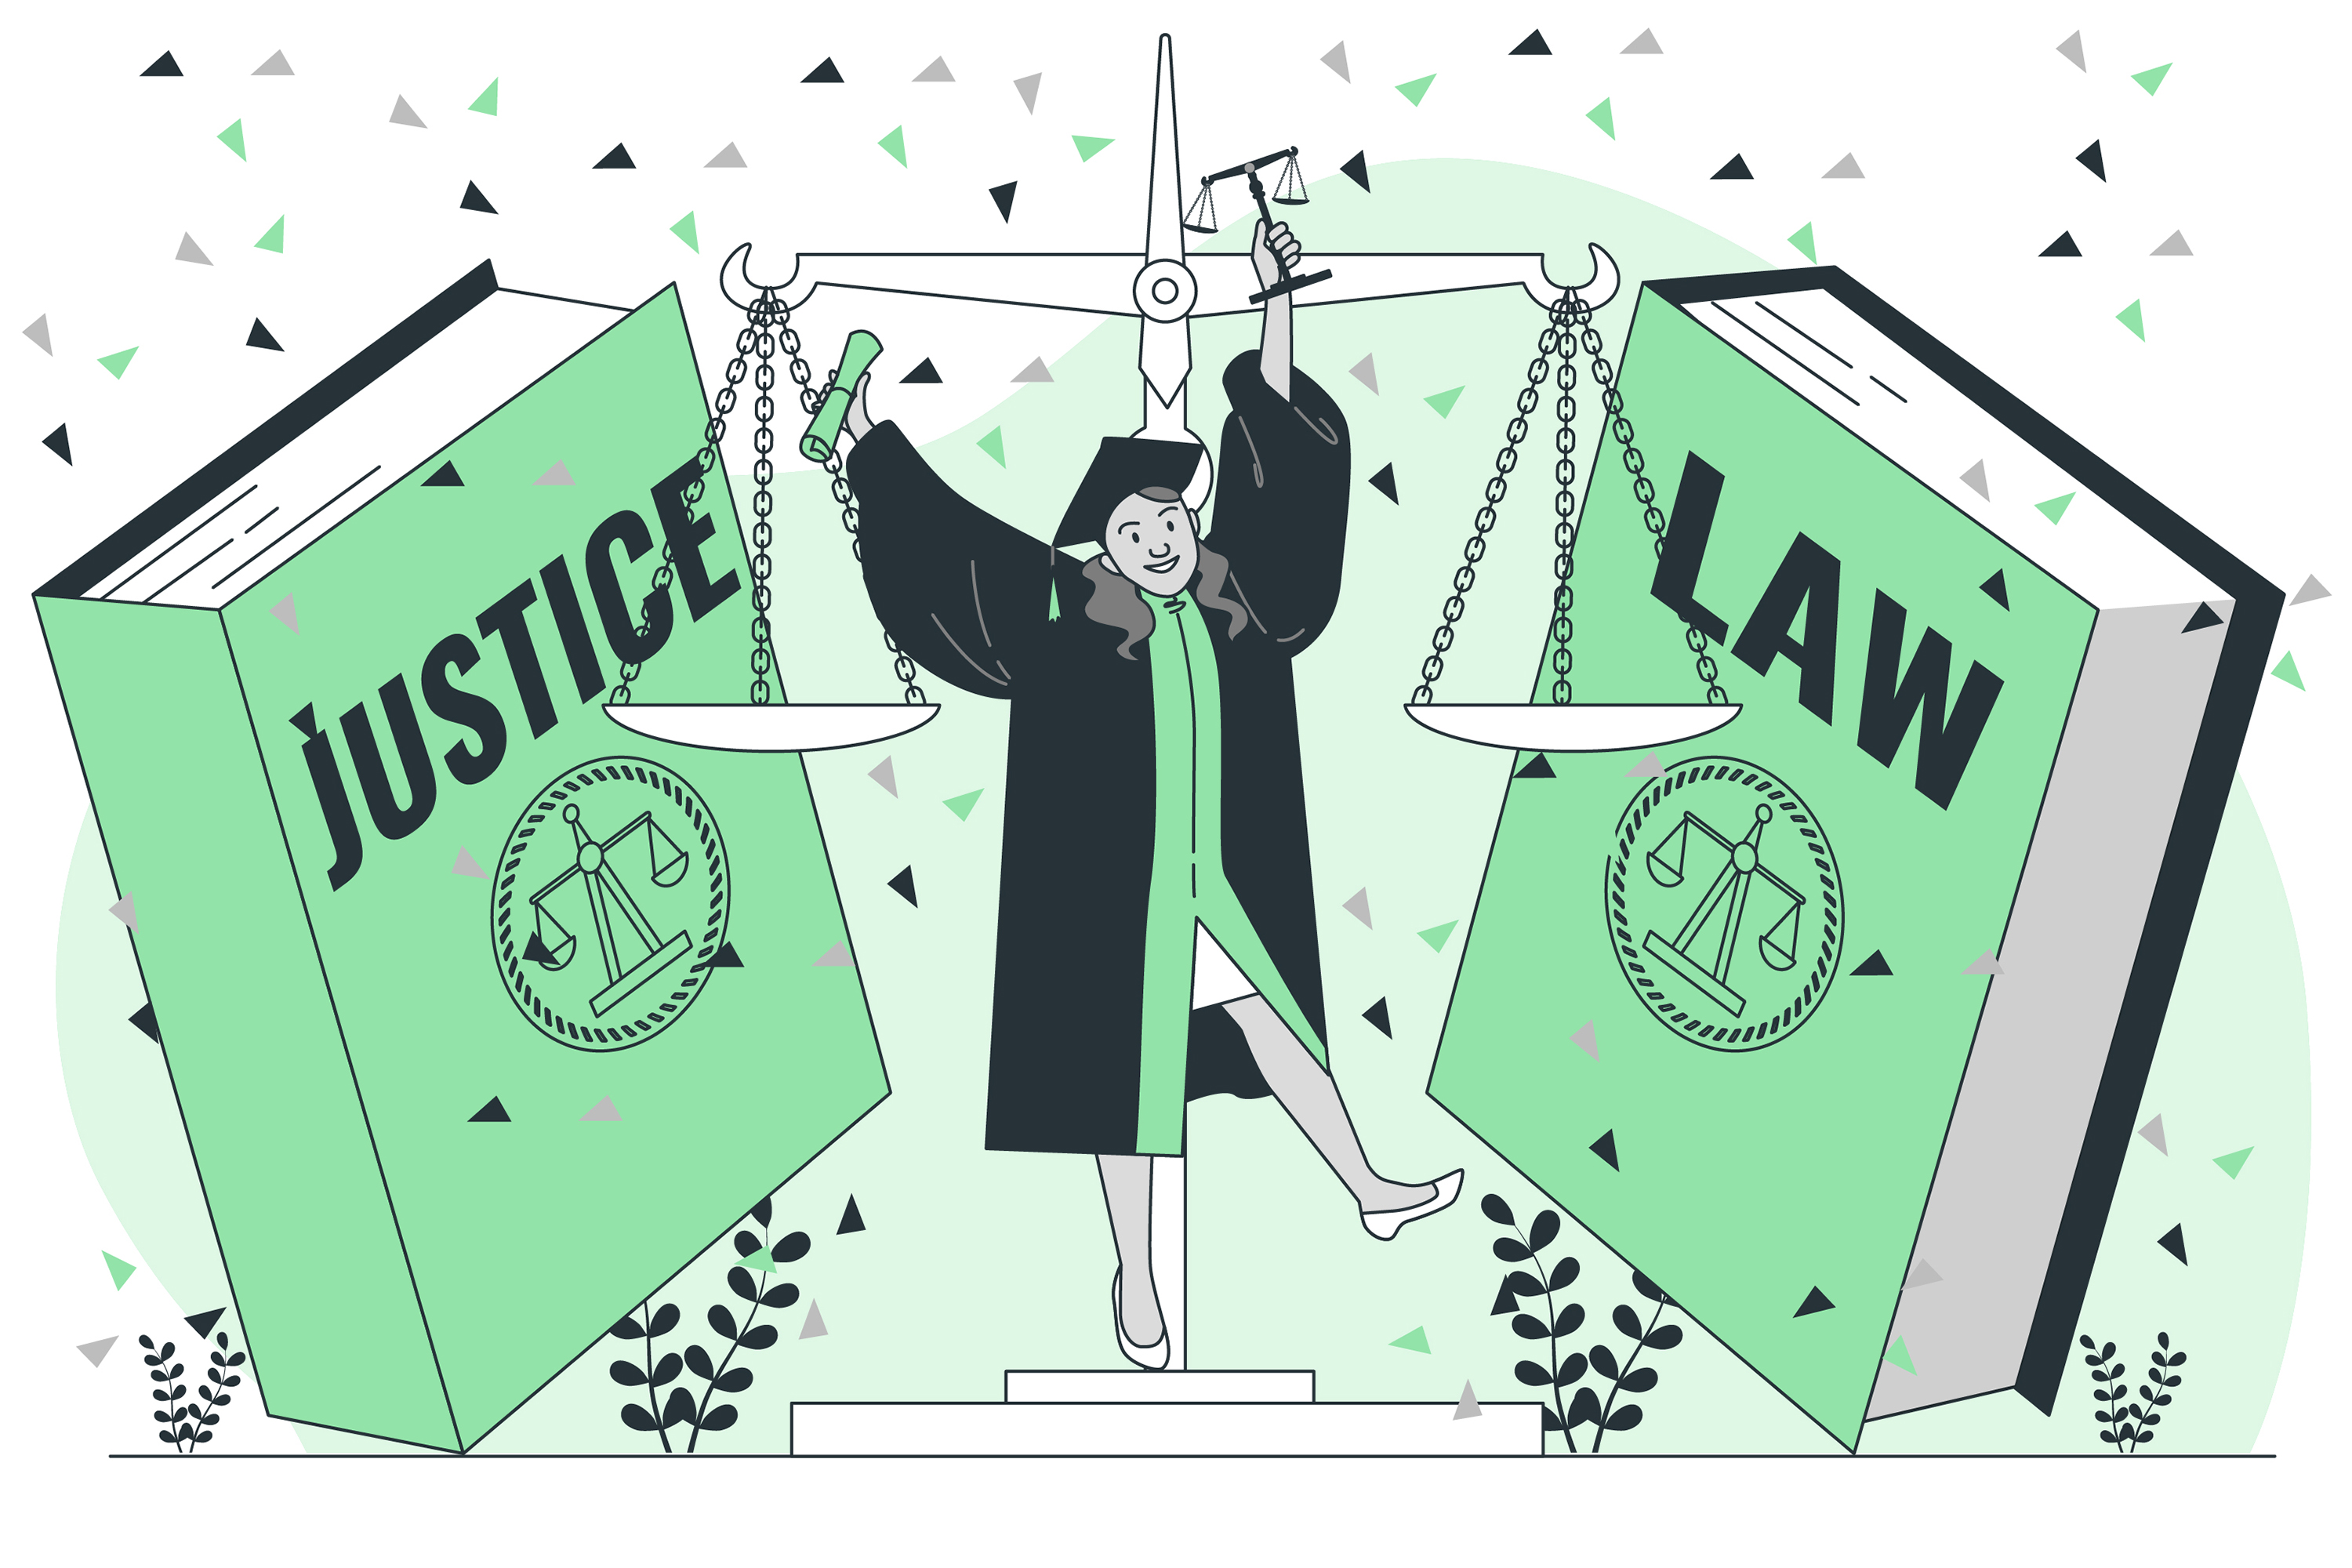 Photo: Why Civic Law Education is Essential